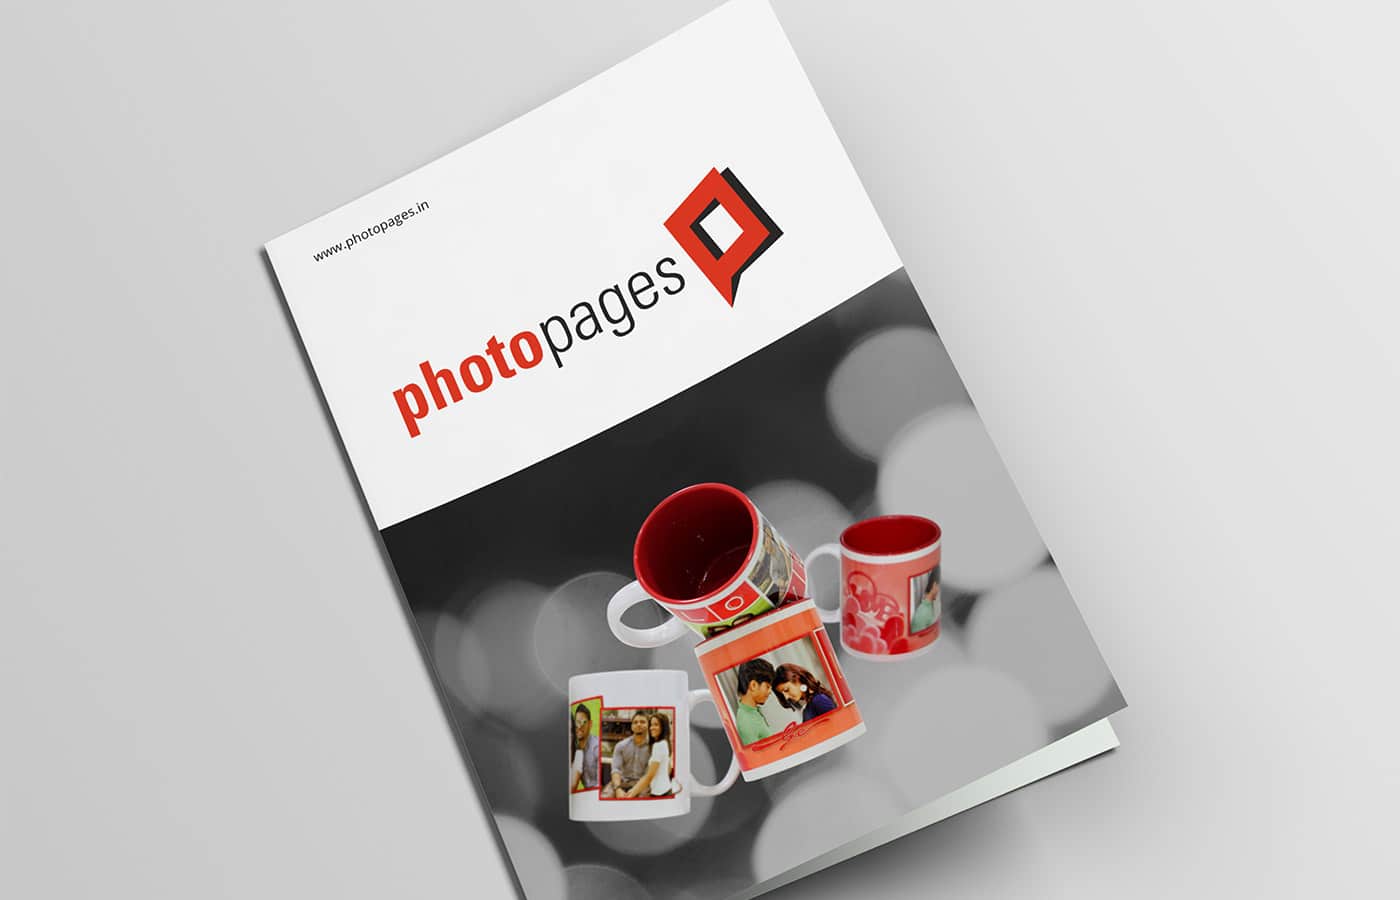 Photopages